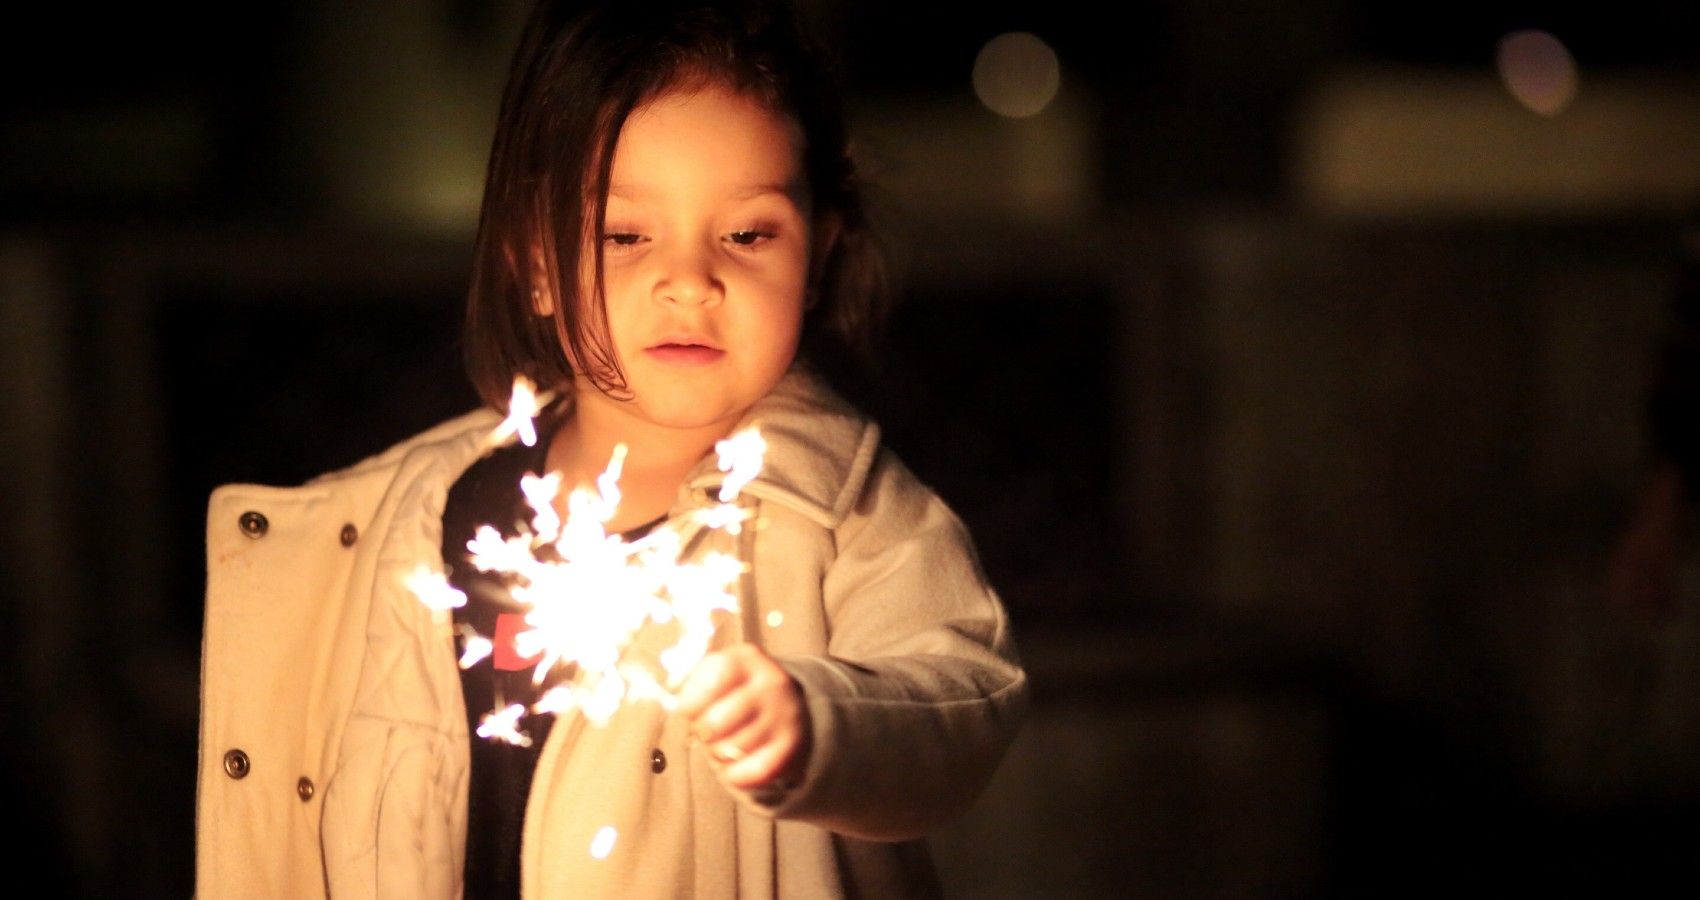 a yougn child using a sparkler firework